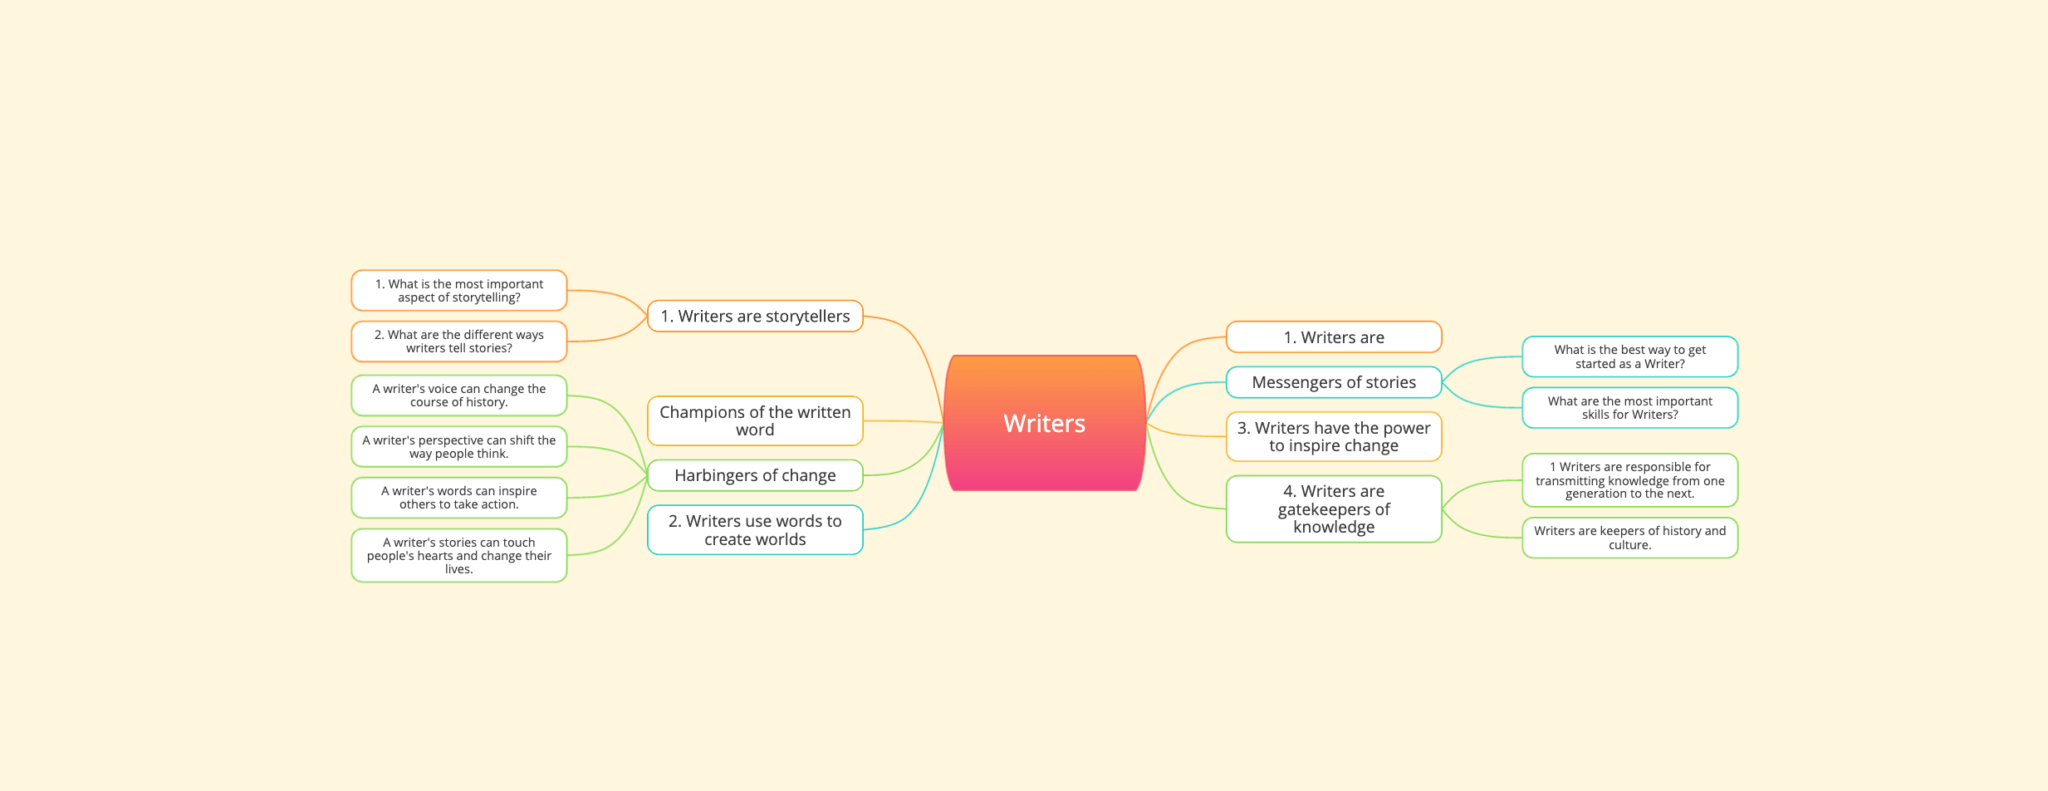 Writers example mind map